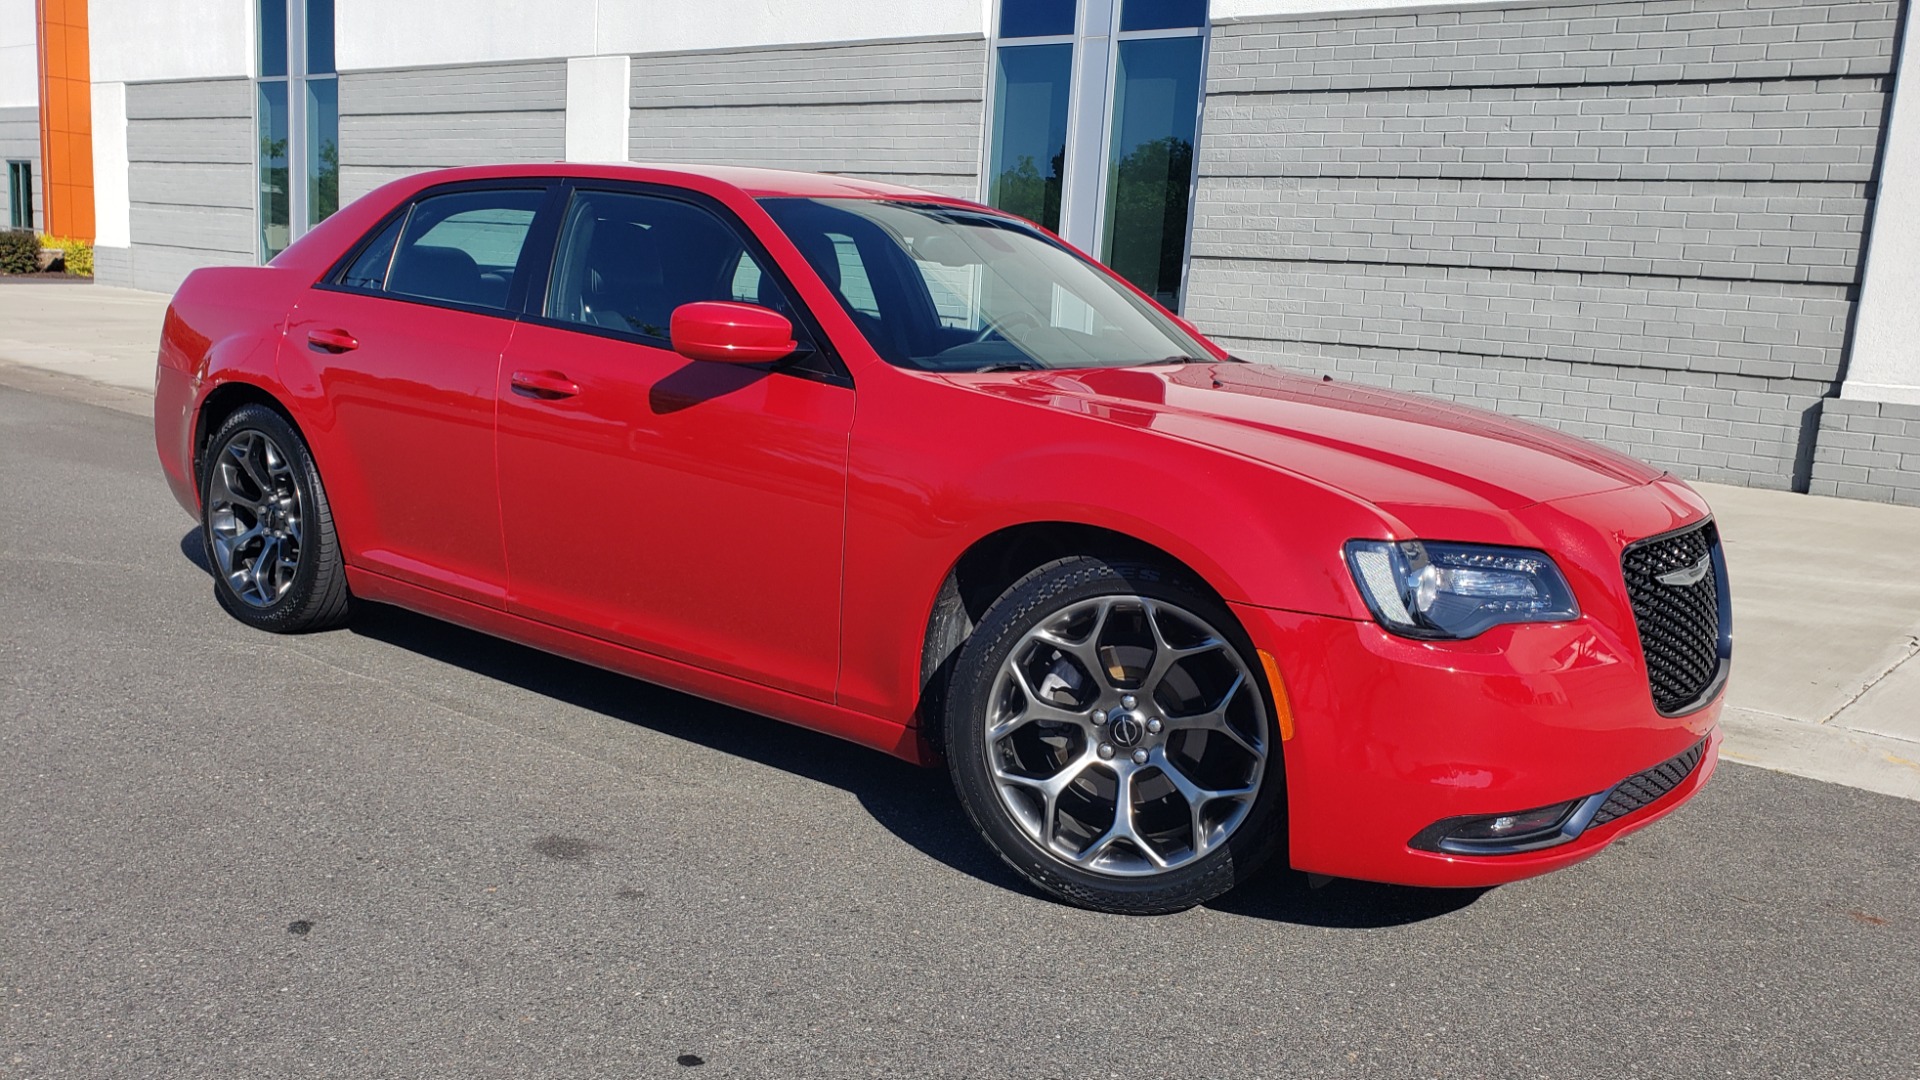 Used 2015 Chrysler 300 S / 3.6L V6 / 8-SPD AUTO / NAV / BEATS AUDIO / HTS STS / REARVIE for sale Sold at Formula Imports in Charlotte NC 28227 6